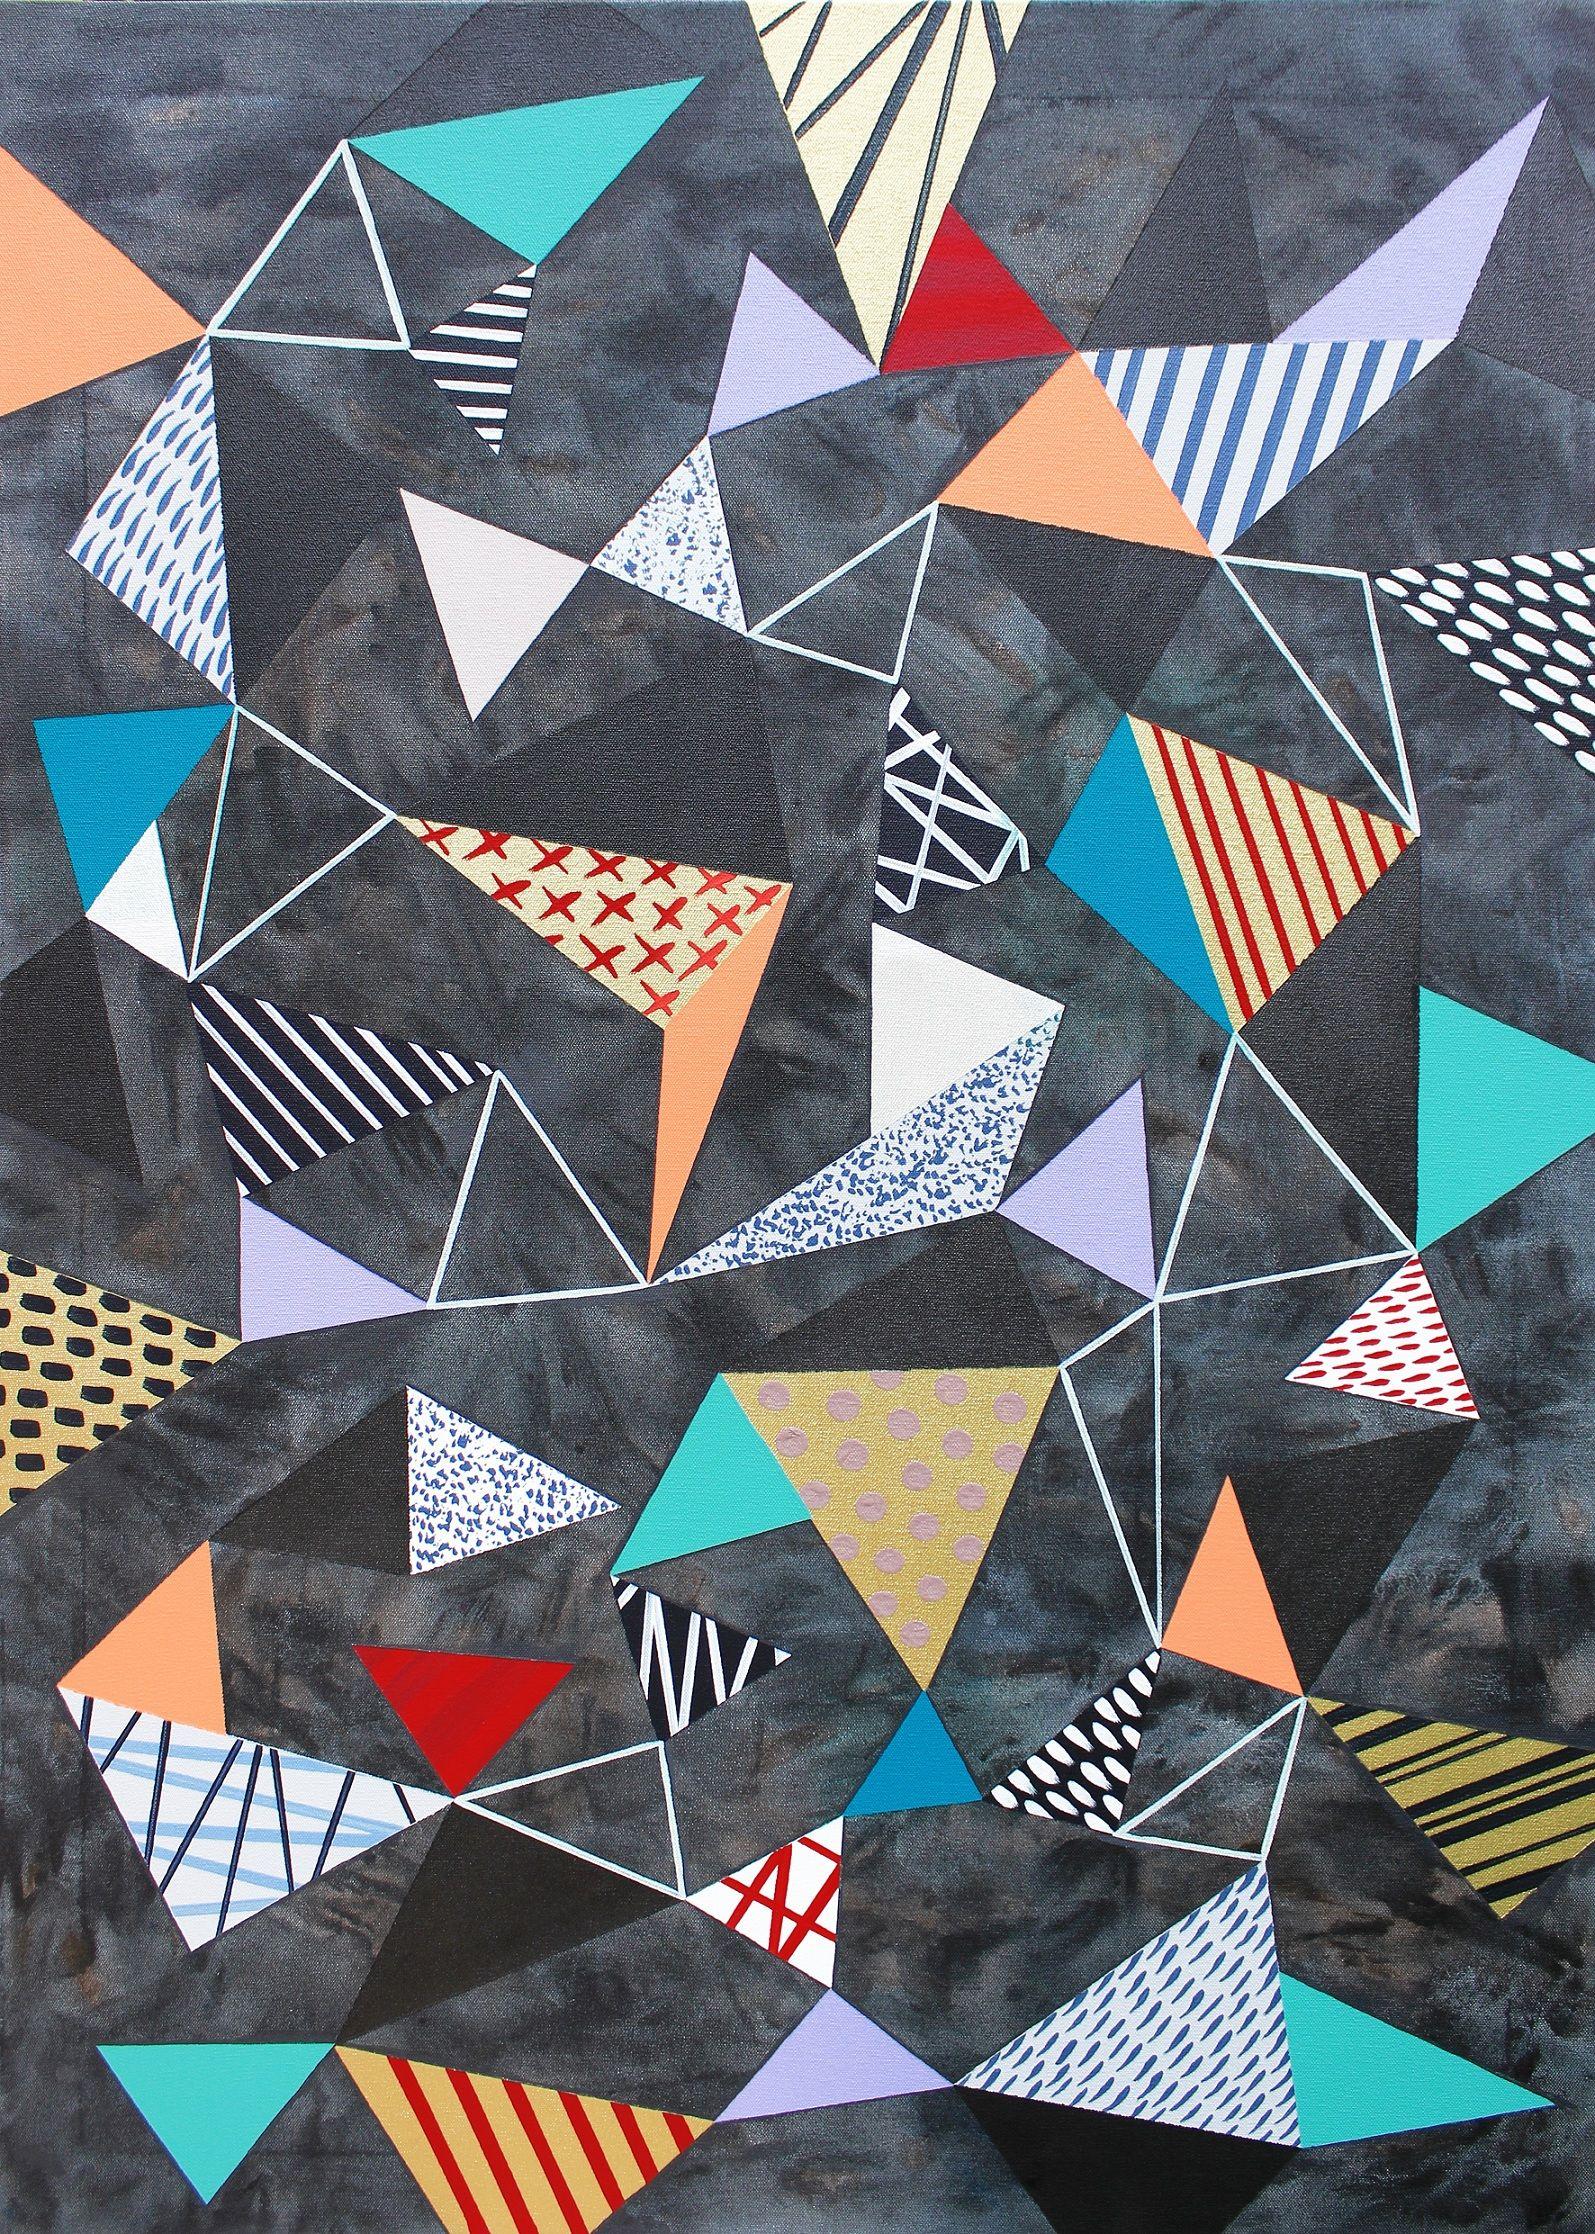 Abstract Painting Lucie Jirku - Triangles 6, Peinture, Acrylique sur Toile